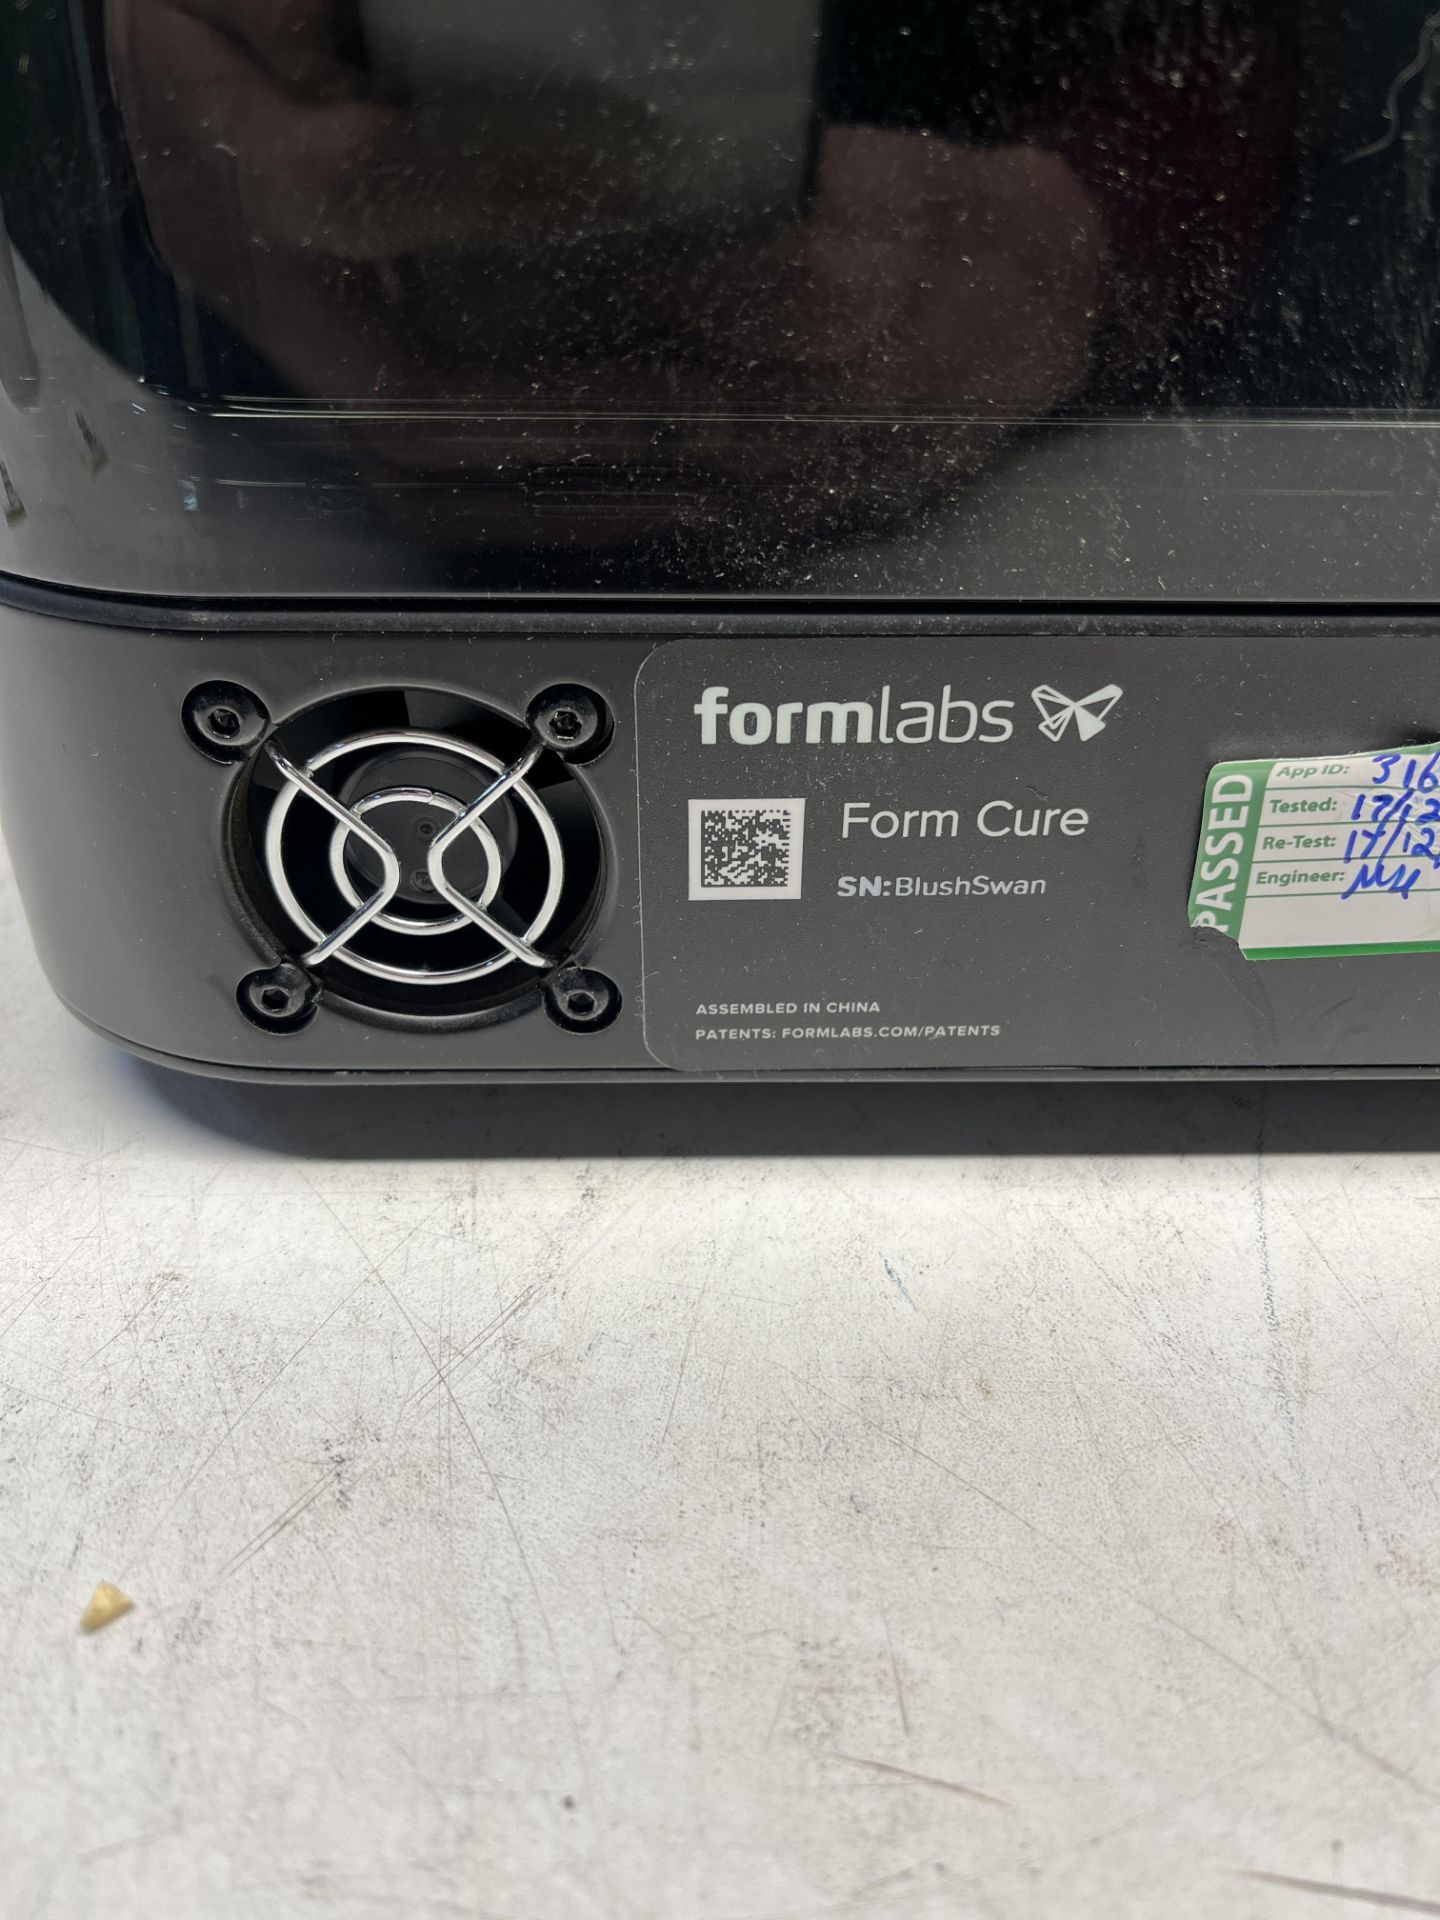 FormLabs Form Cure S/N: BlushSwan - Image 4 of 5